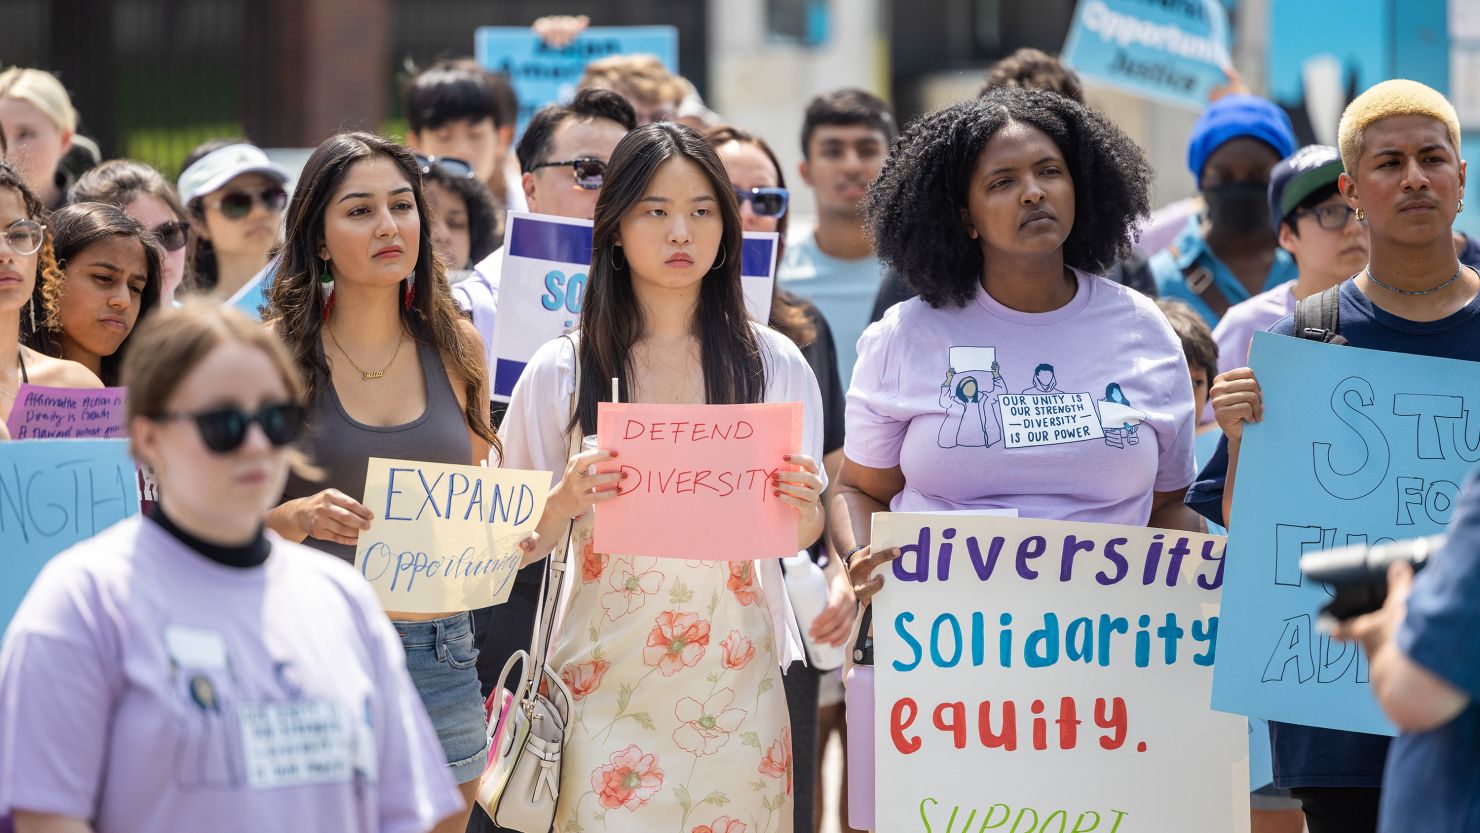 Students and others gather at Harvard University's Science Center Plaza to rally in support of Affirmative Action after the Supreme Court ruling on July 1, 2023 in Cambridge, Massachusetts.